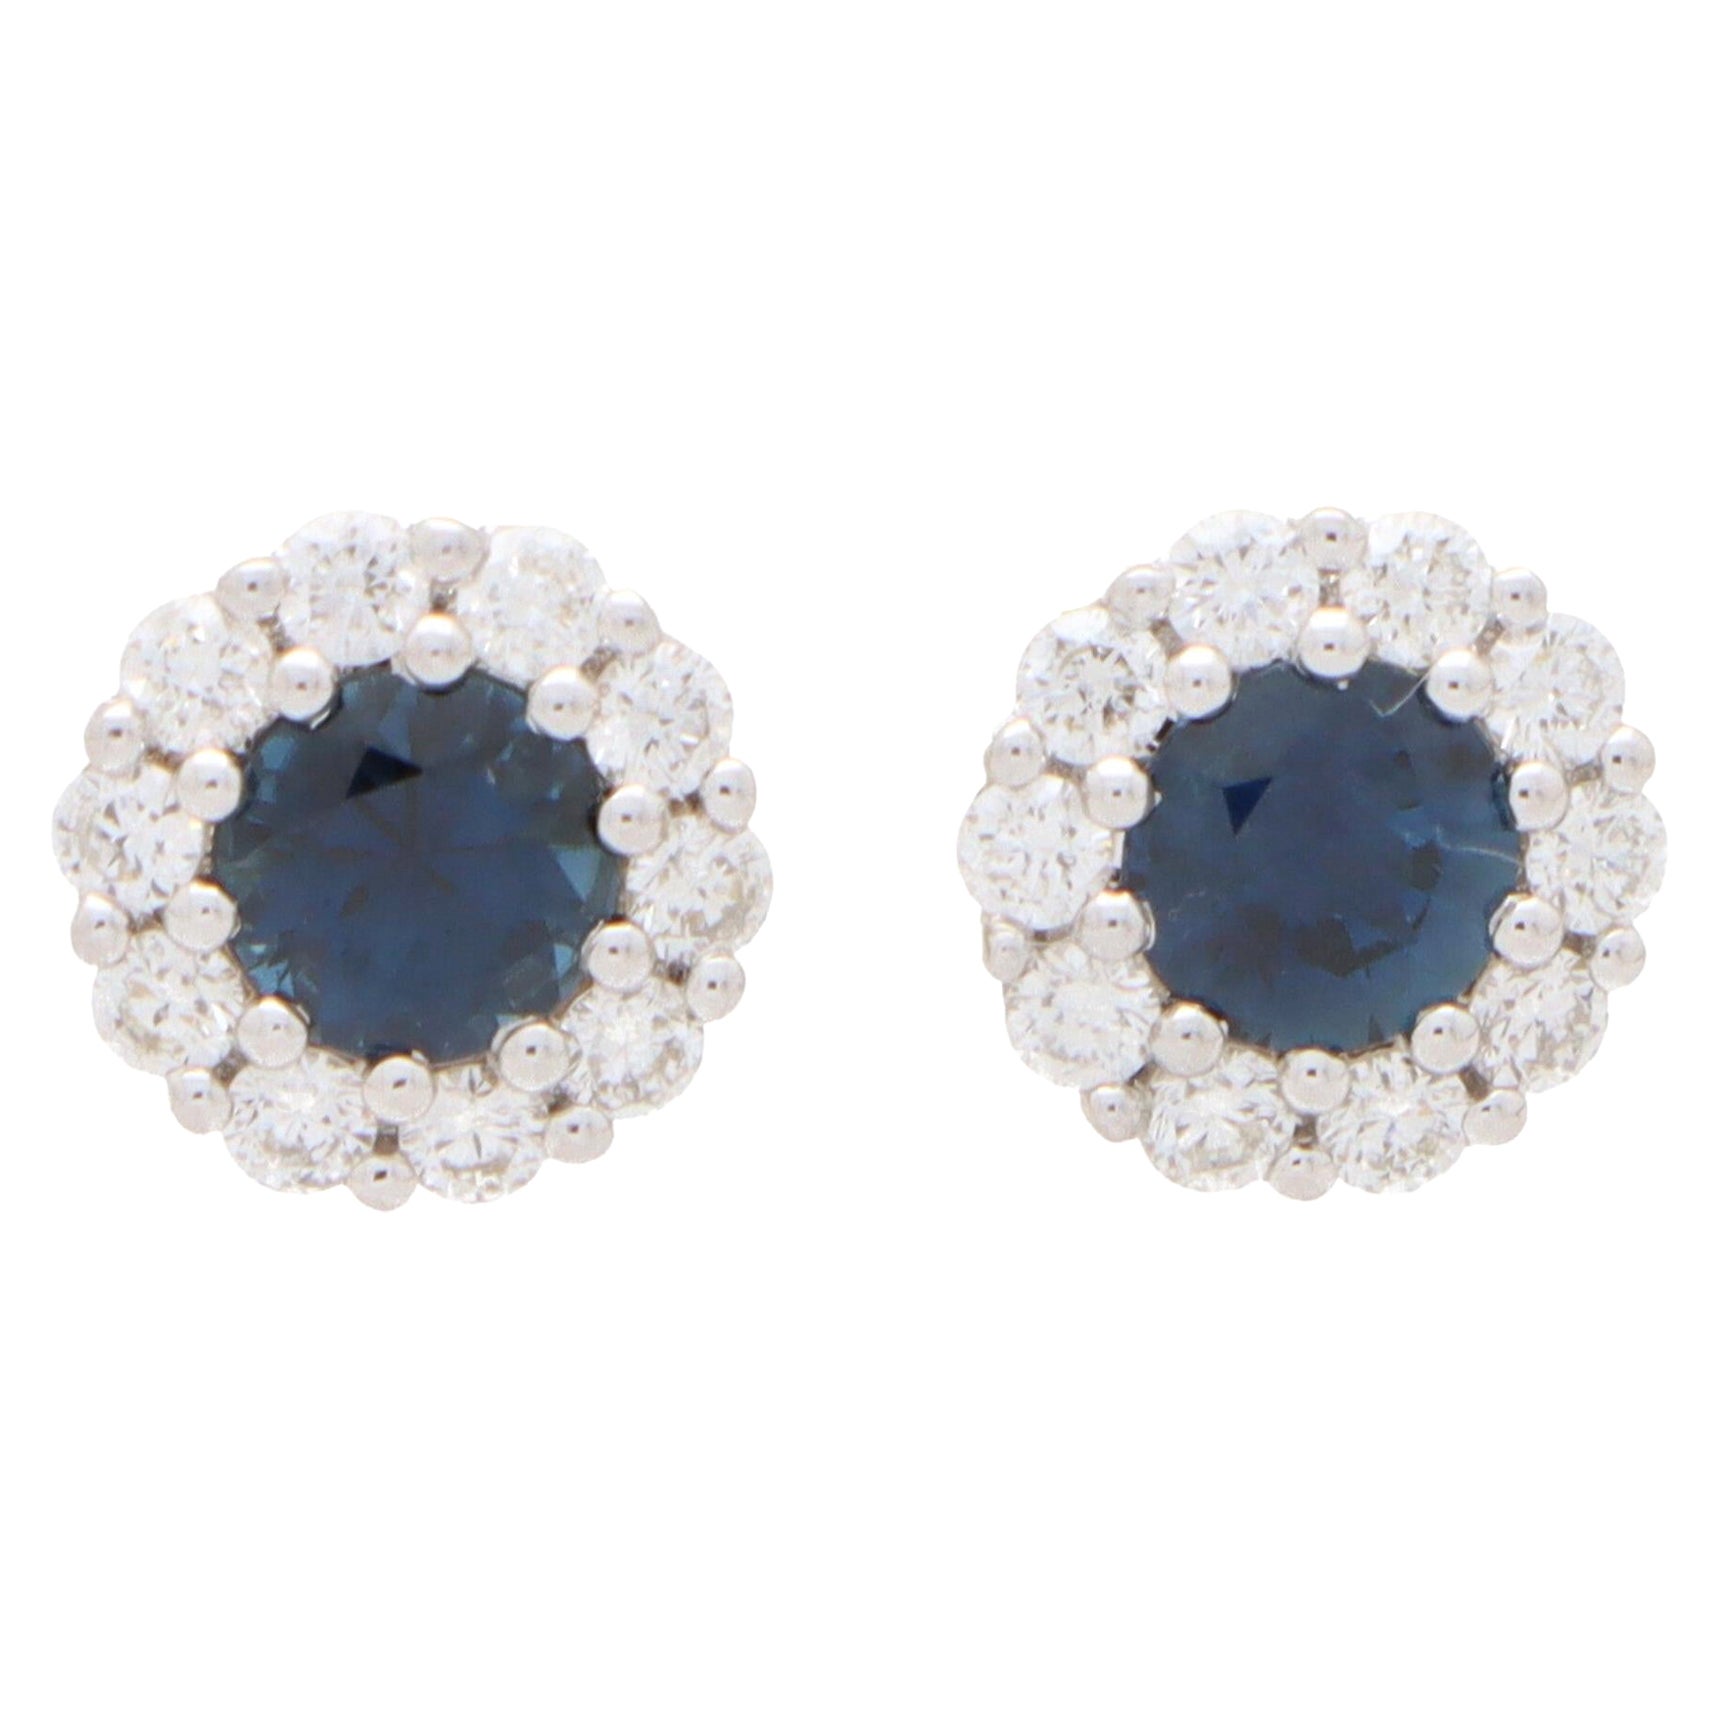 Round Sapphire and Diamond Cluster Earrings Set in 18k White Gold